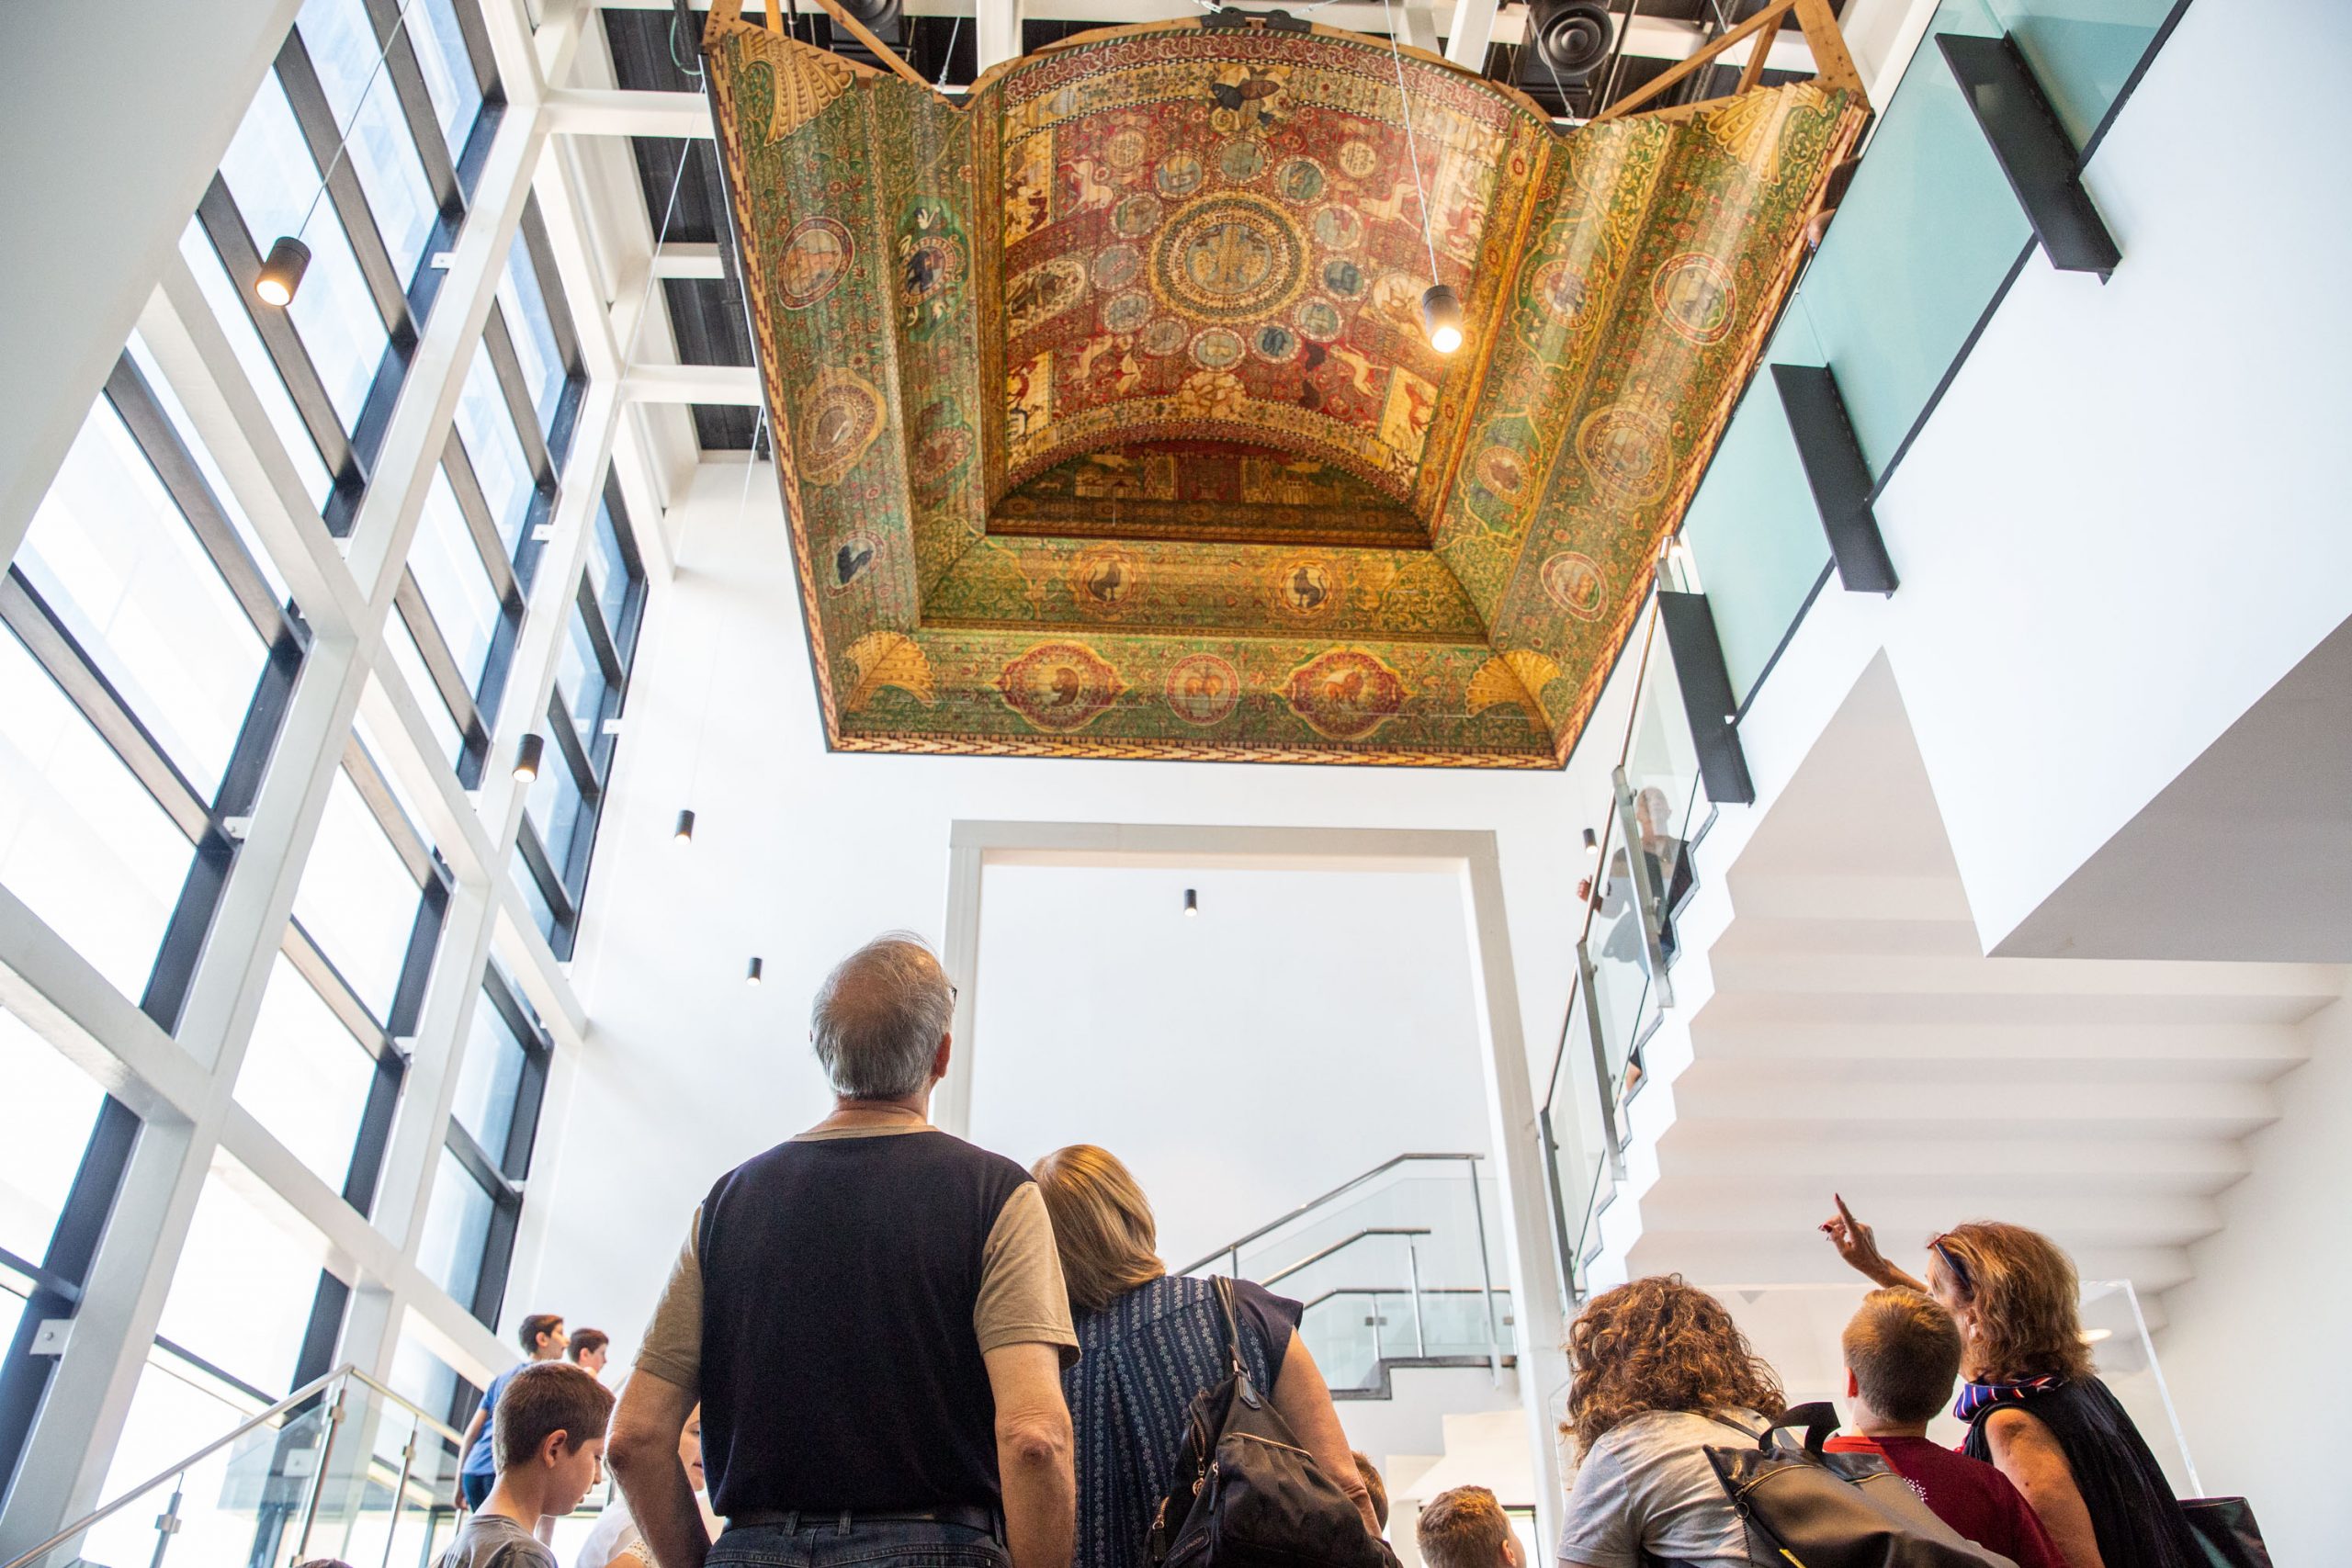 Visitors on a guided tour looking at the chodorow synagogue ceiling (photo: Yotam Ronen)